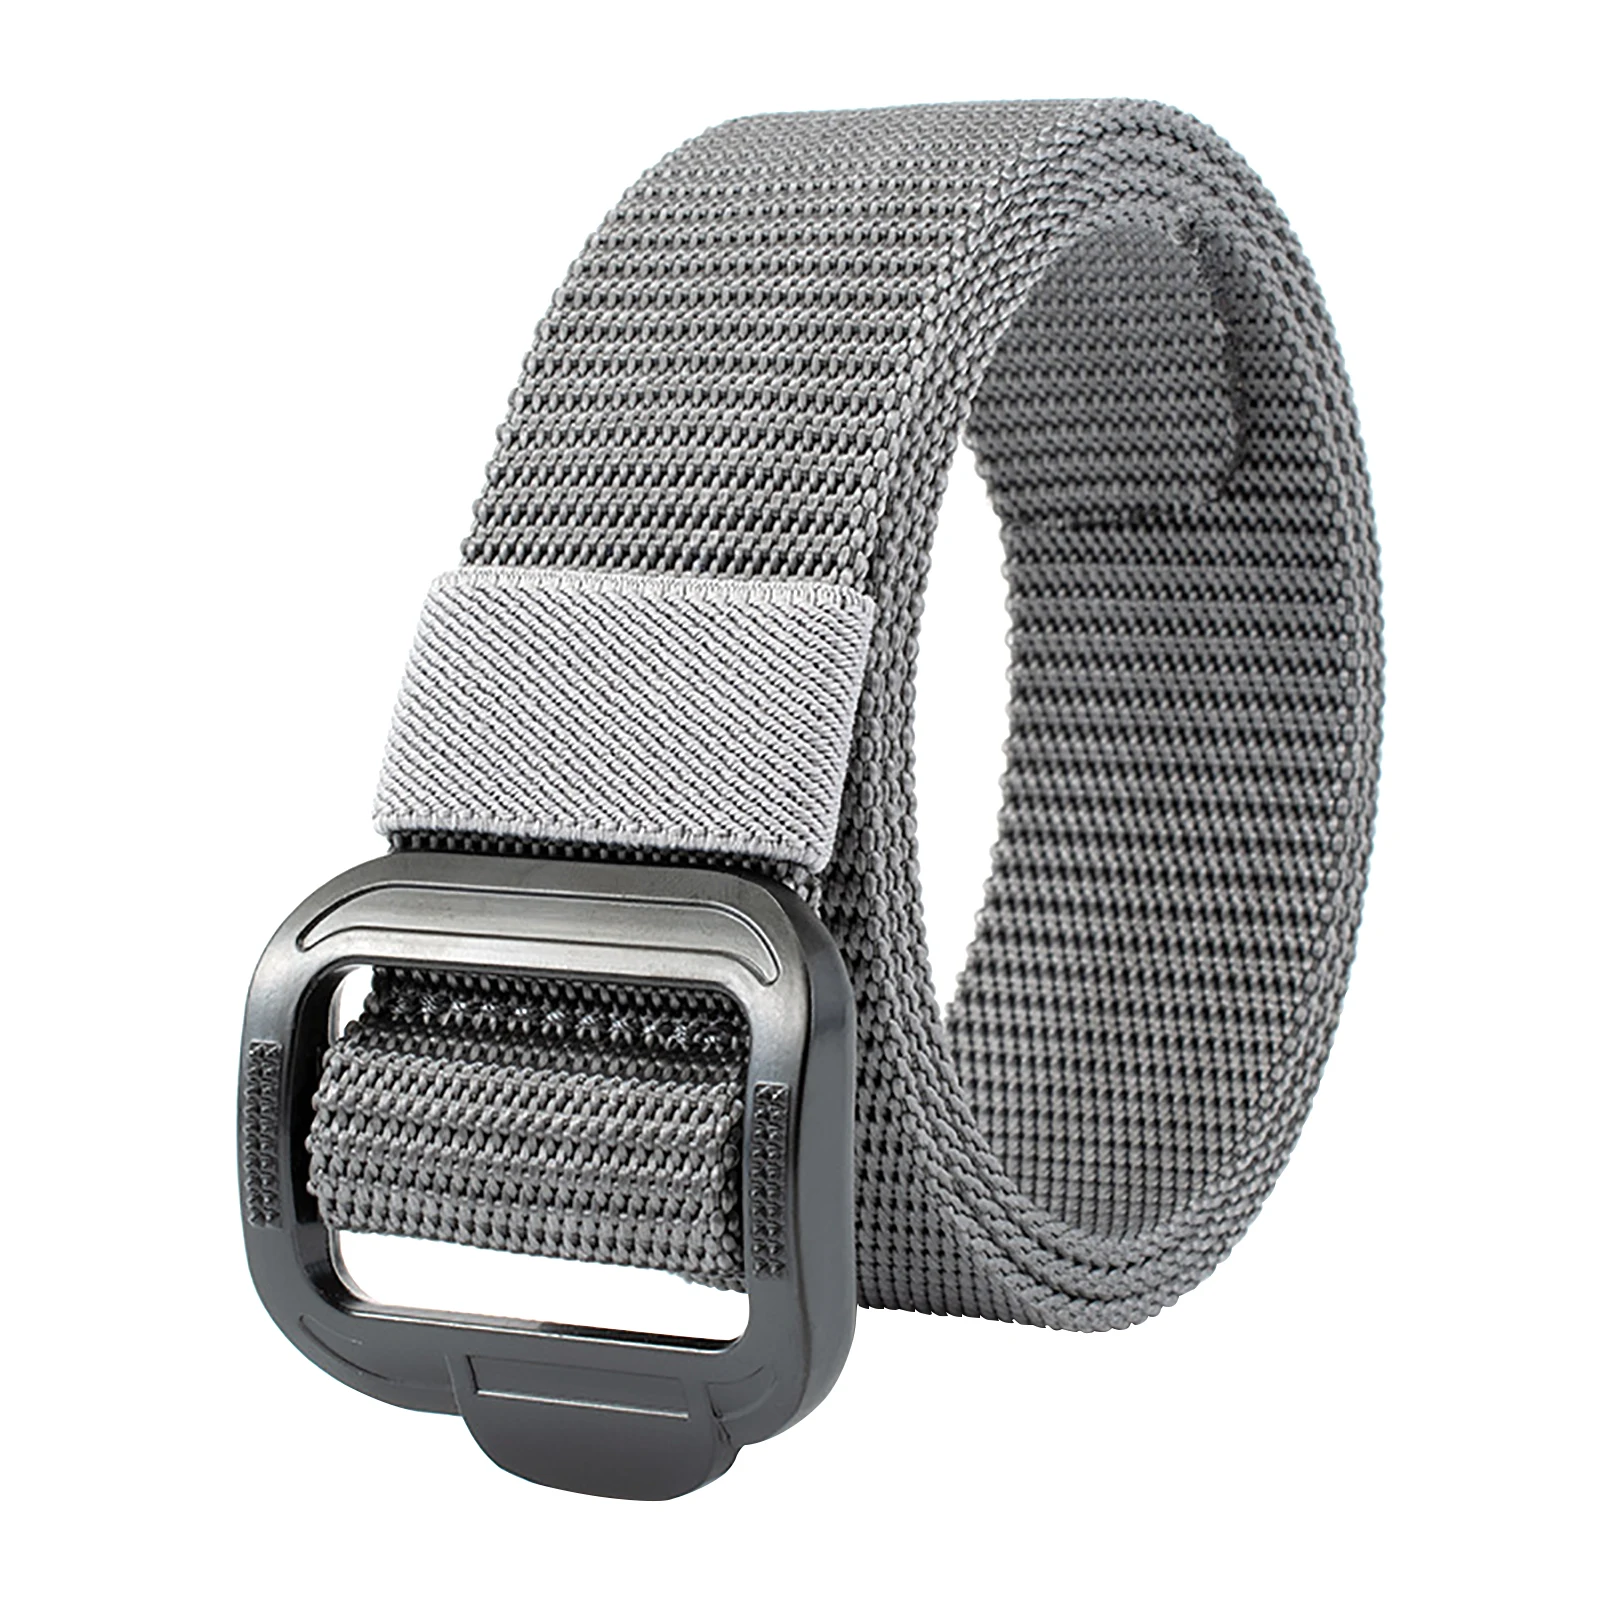 Men Women Fashion Multifunction Casual Metal Buckle Nylon Gifts Waist Strap Canvas Belt Apparel Accessories Daily Waistband